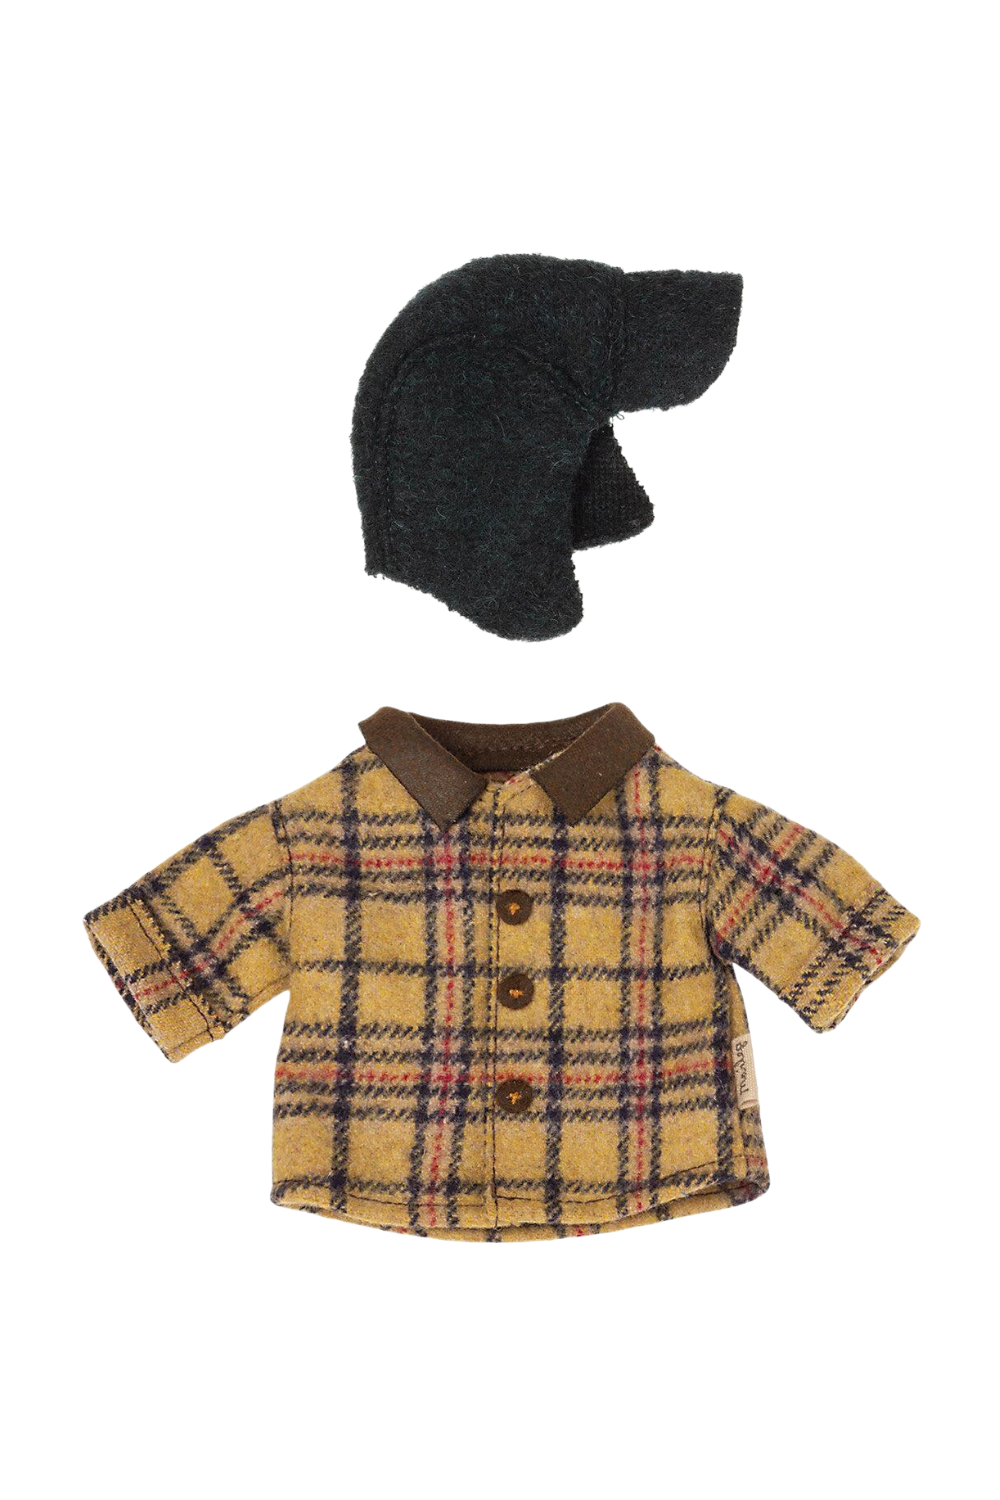 Woodsman Outfit for Teddy Dad